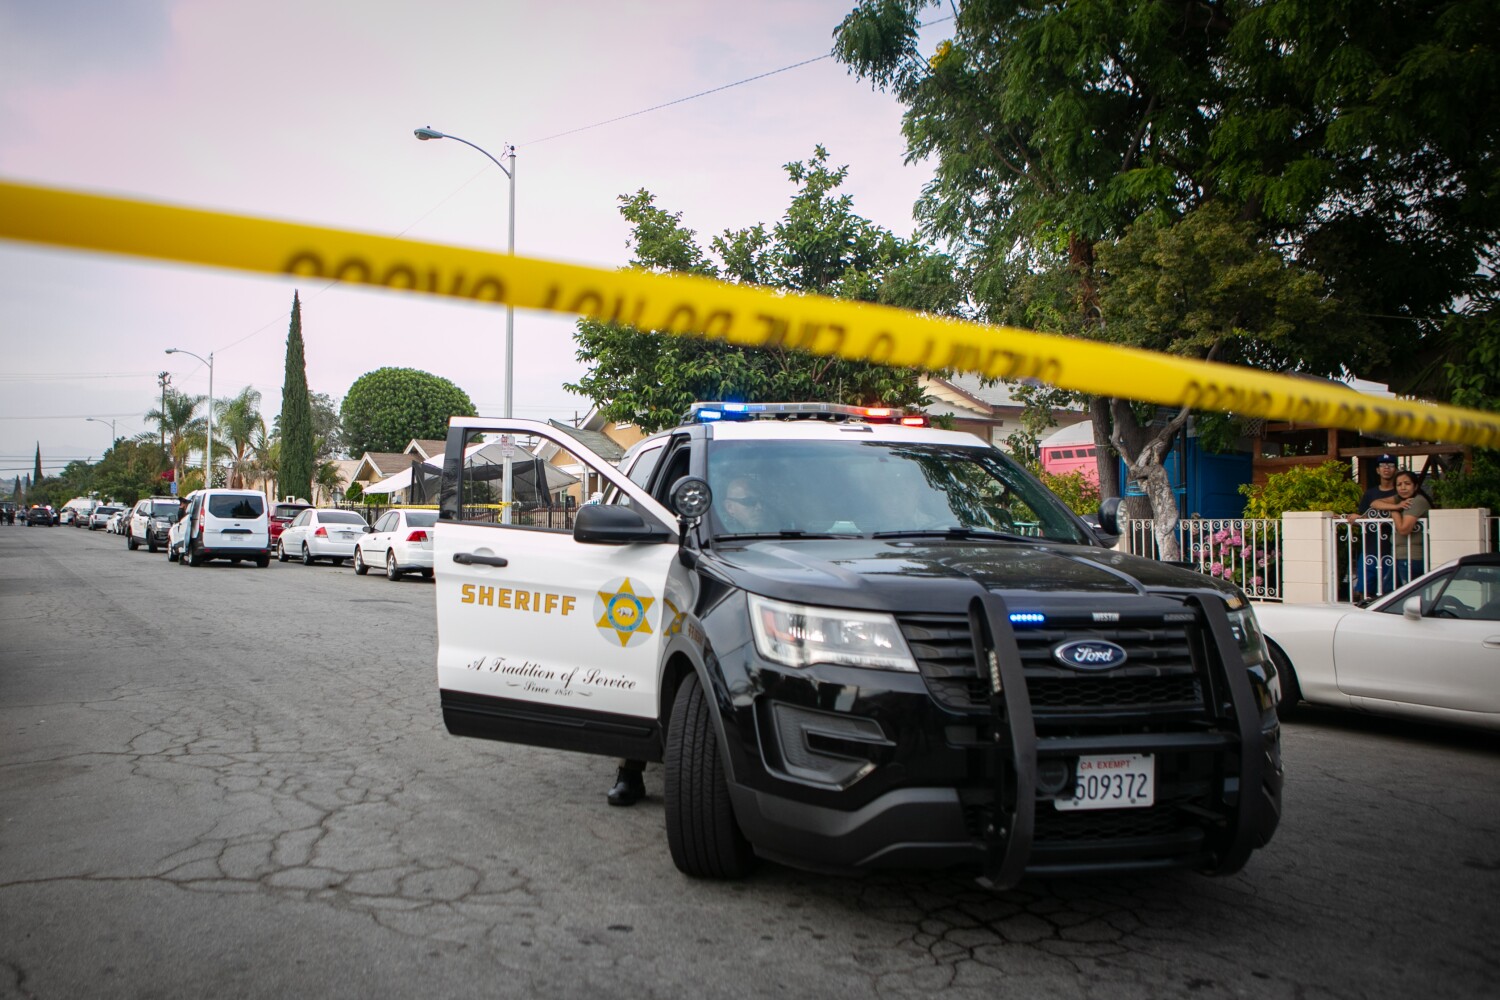 Mother of 3 children found dead in East L.A. is arrested on suspicion of murder